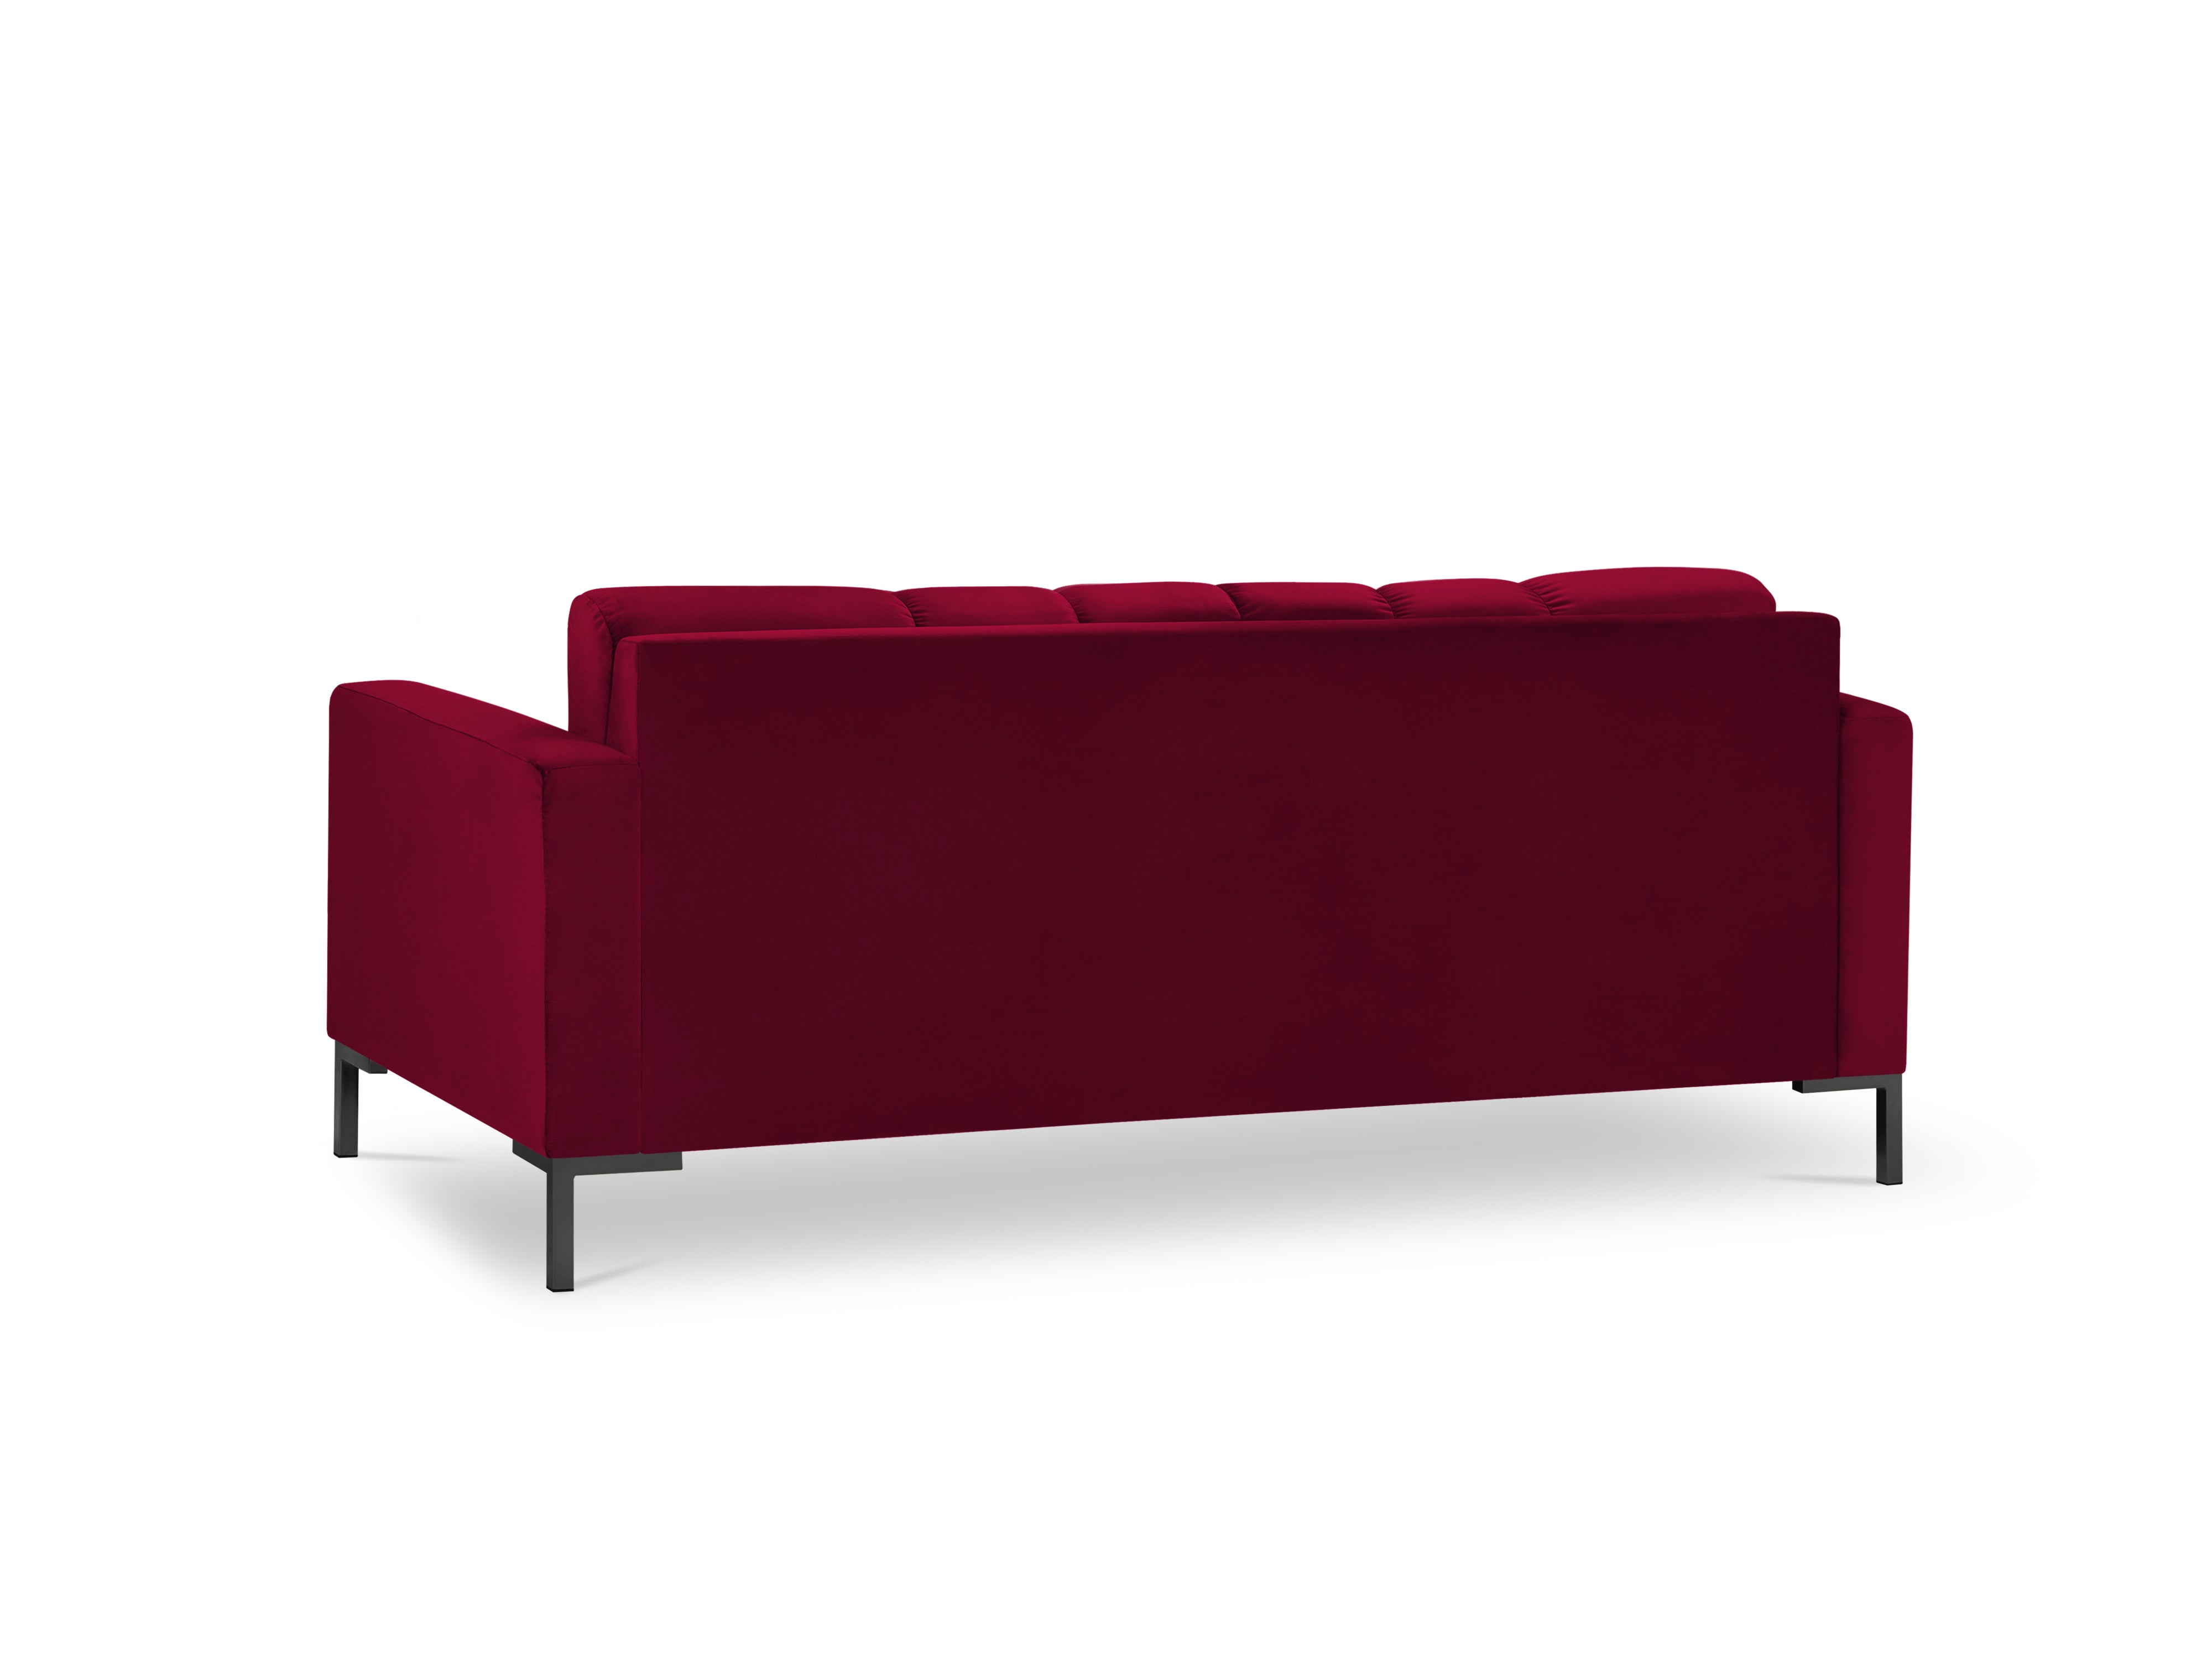 Red sofa with a black base